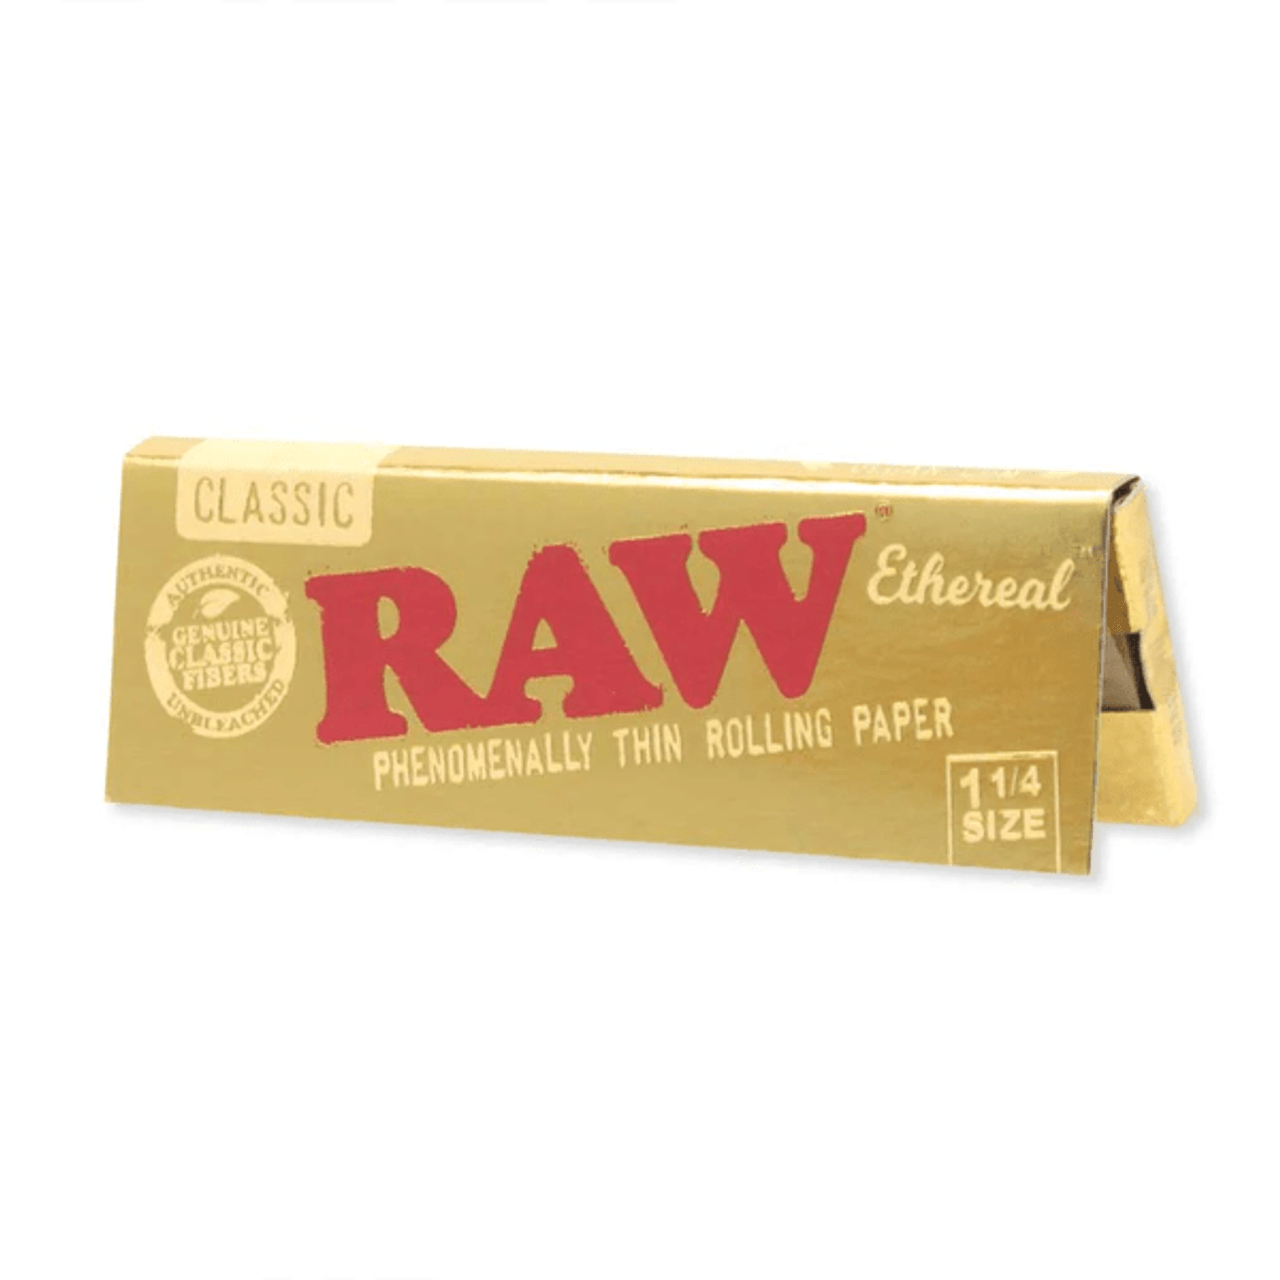 RAW - Ethereal Papers | 1 1/4 | 24ct